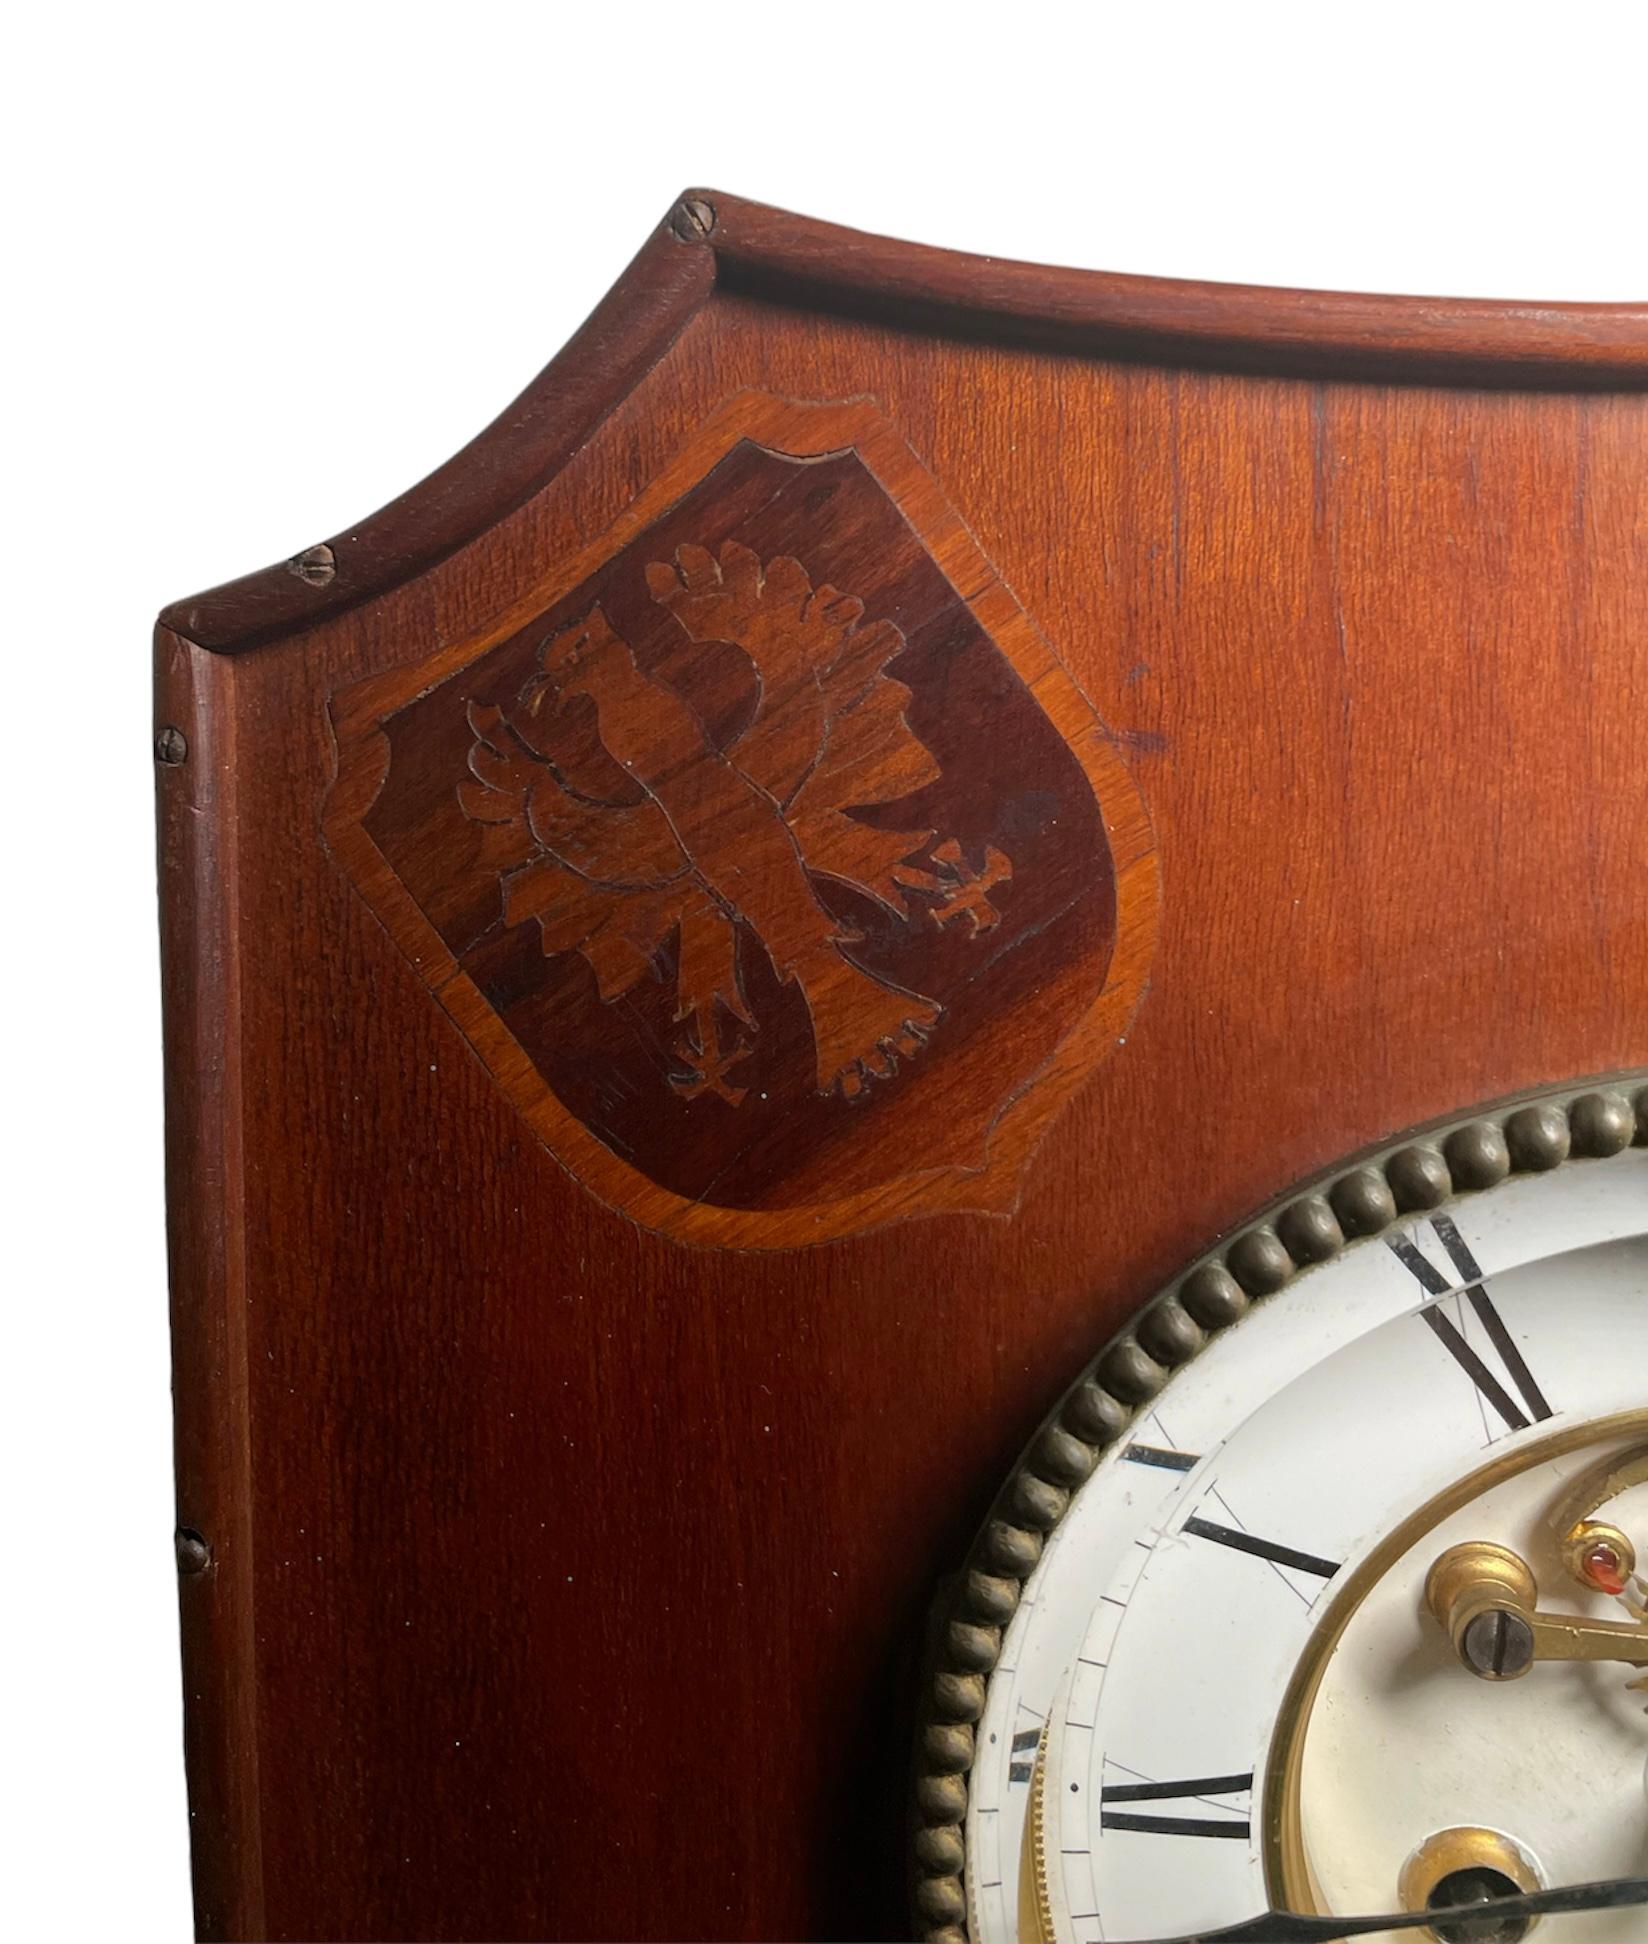 This is a Henry Lepaute wood wall clock. It depicts the clock wood case shaped as a coat of arm shield. The wood case is adorned in each one of the upper corners with one heraldic symbol made of marquetry. The round clock face is white color with